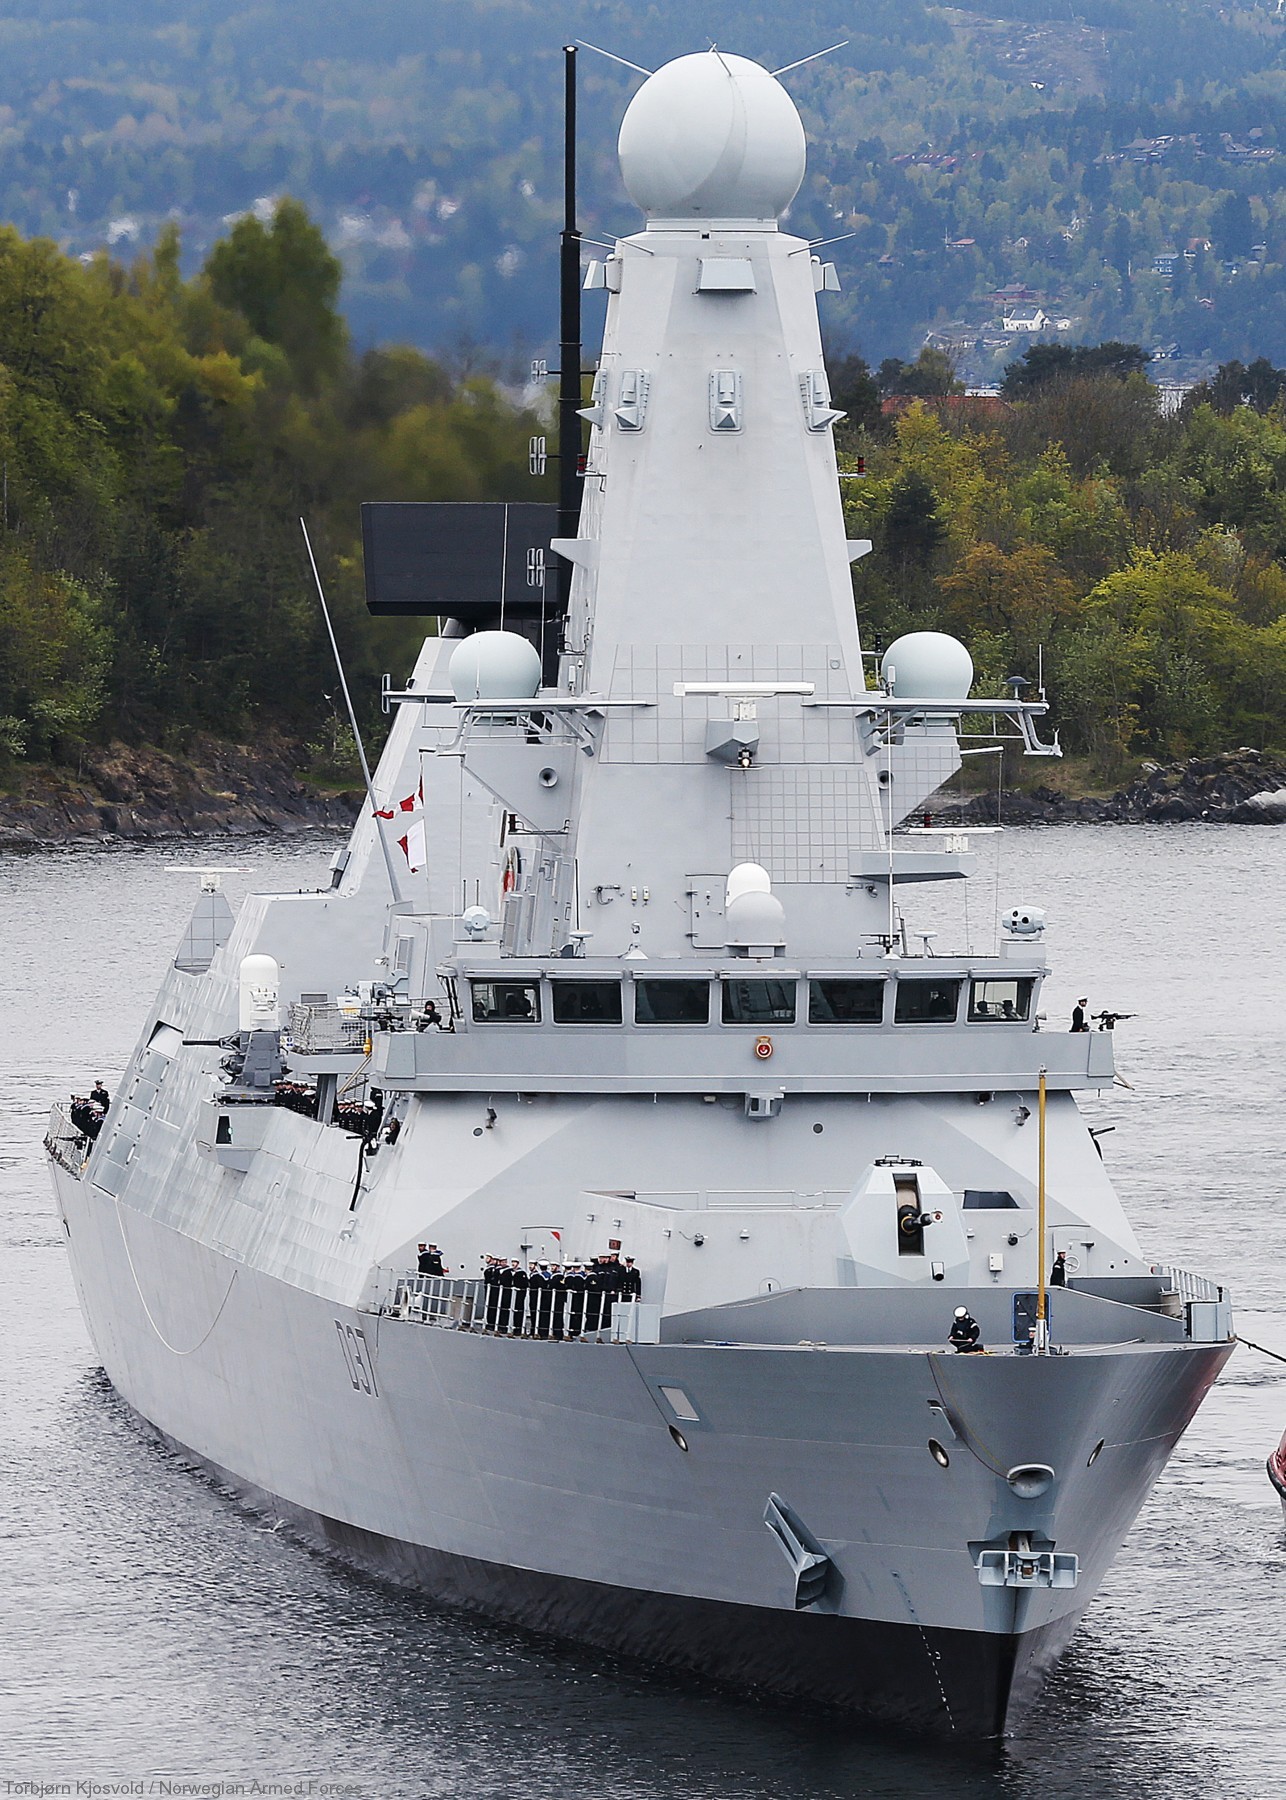 d37 hms duncan d-37 type 45 daring class guided missile destroyer ddg royal navy sea viper 40